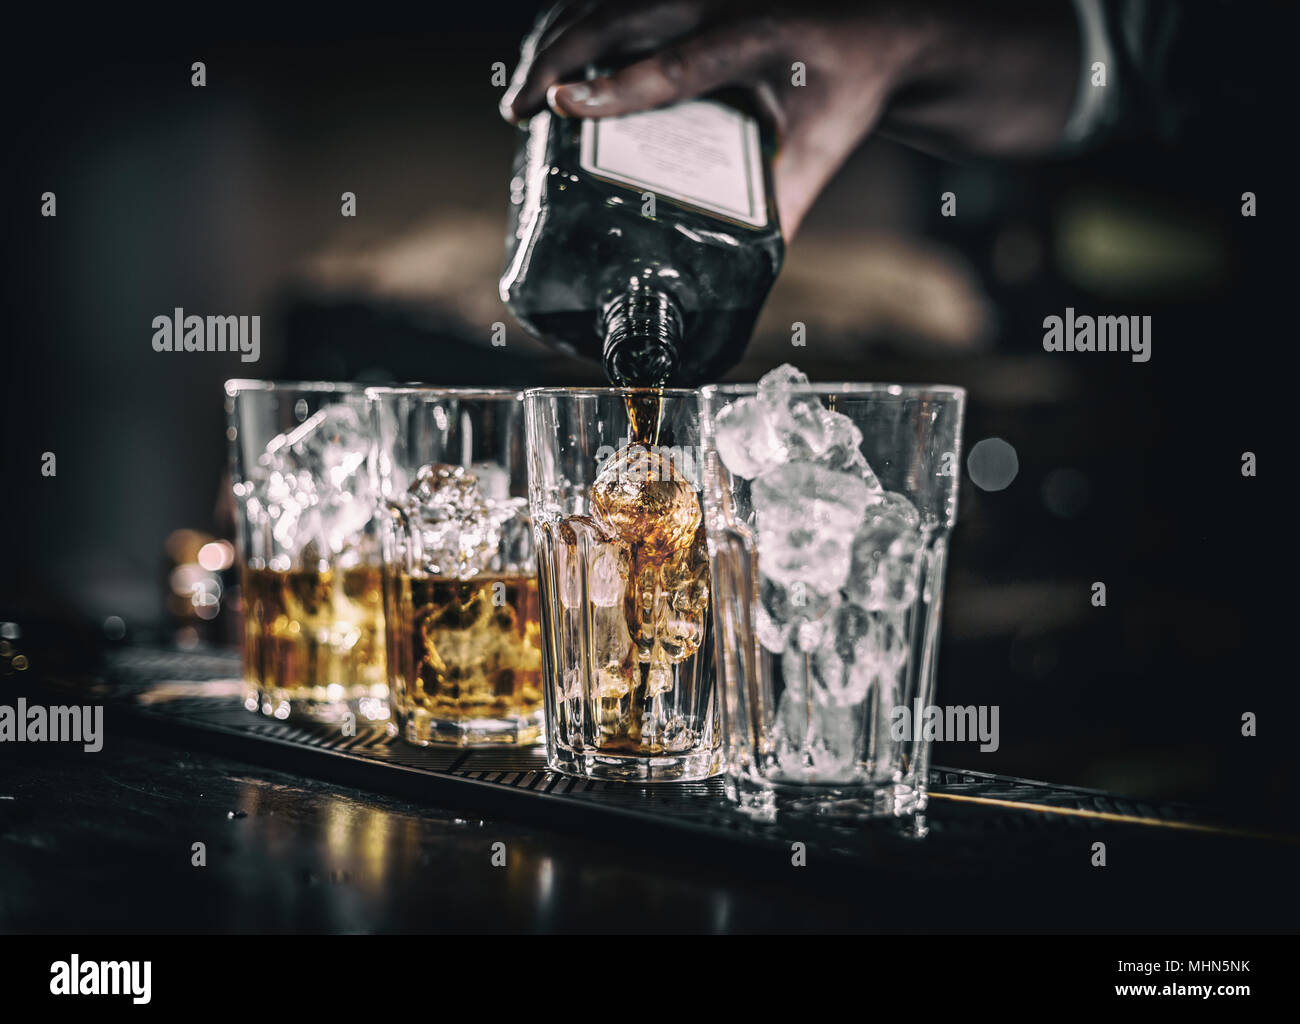 Barman pouring alcoholic drink into the glasses with ice cubes on the bar counter Stock Photo